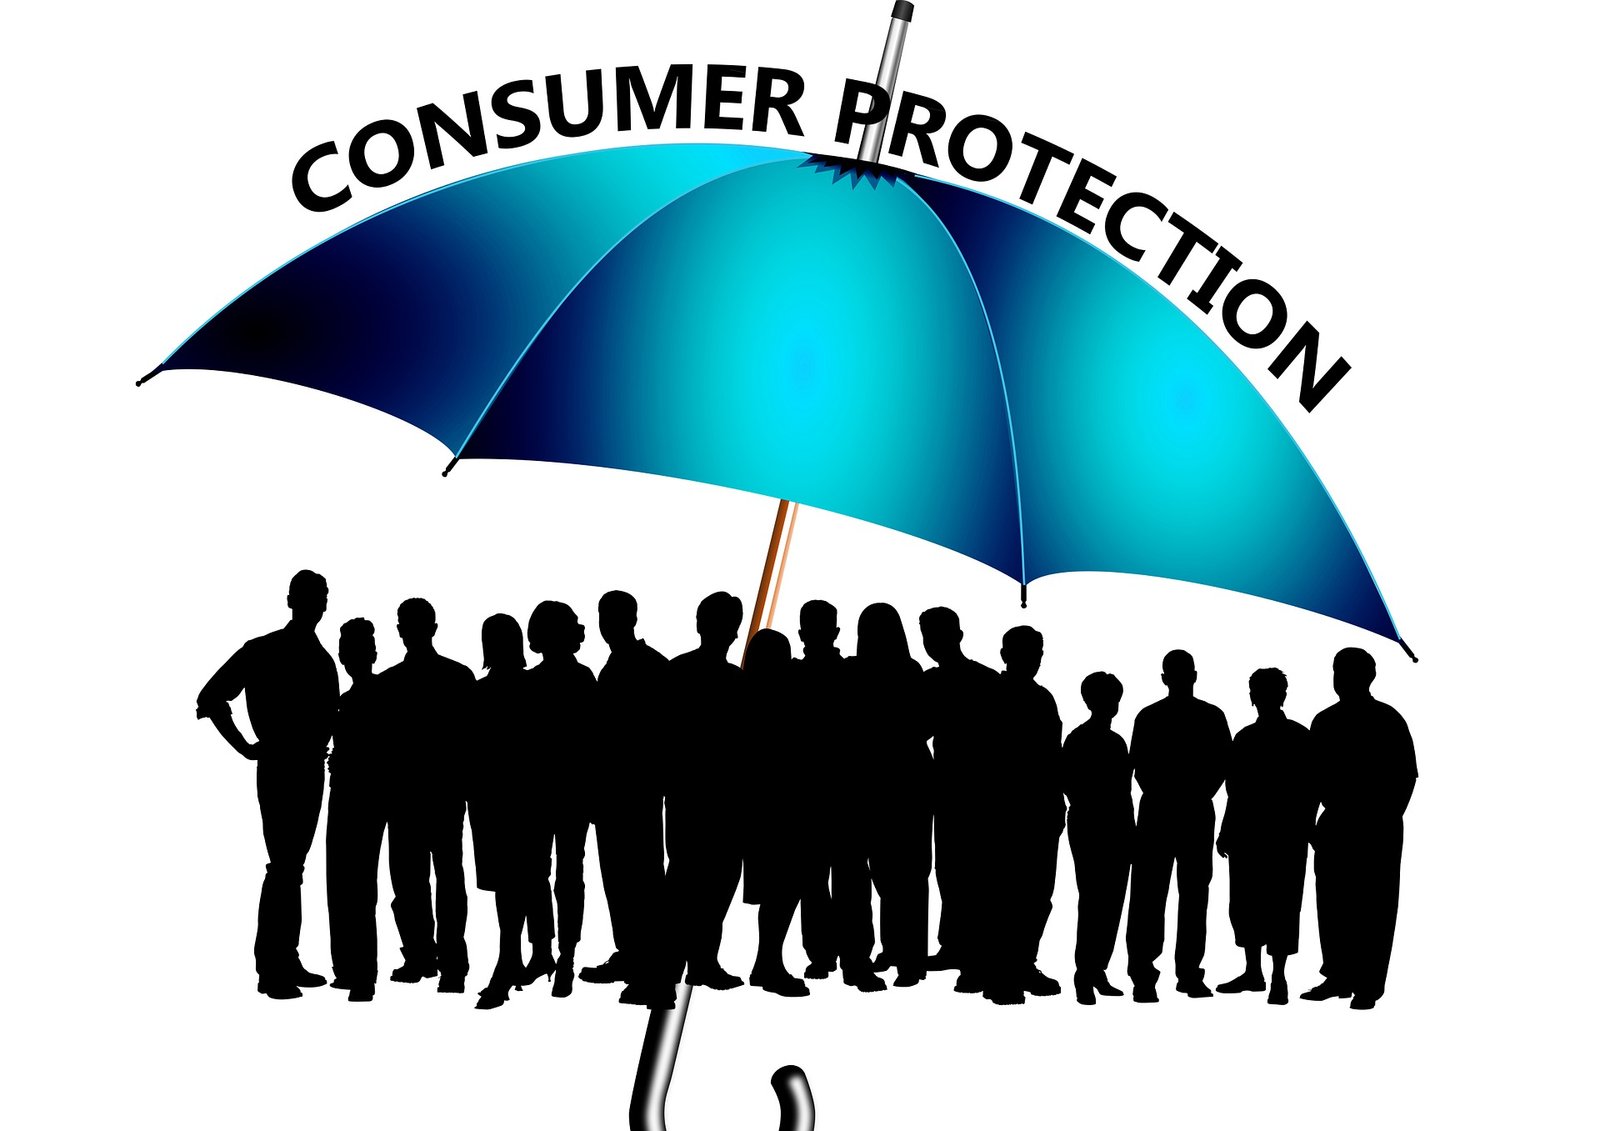 Consumer protection act Egypt, and its effect on the property market